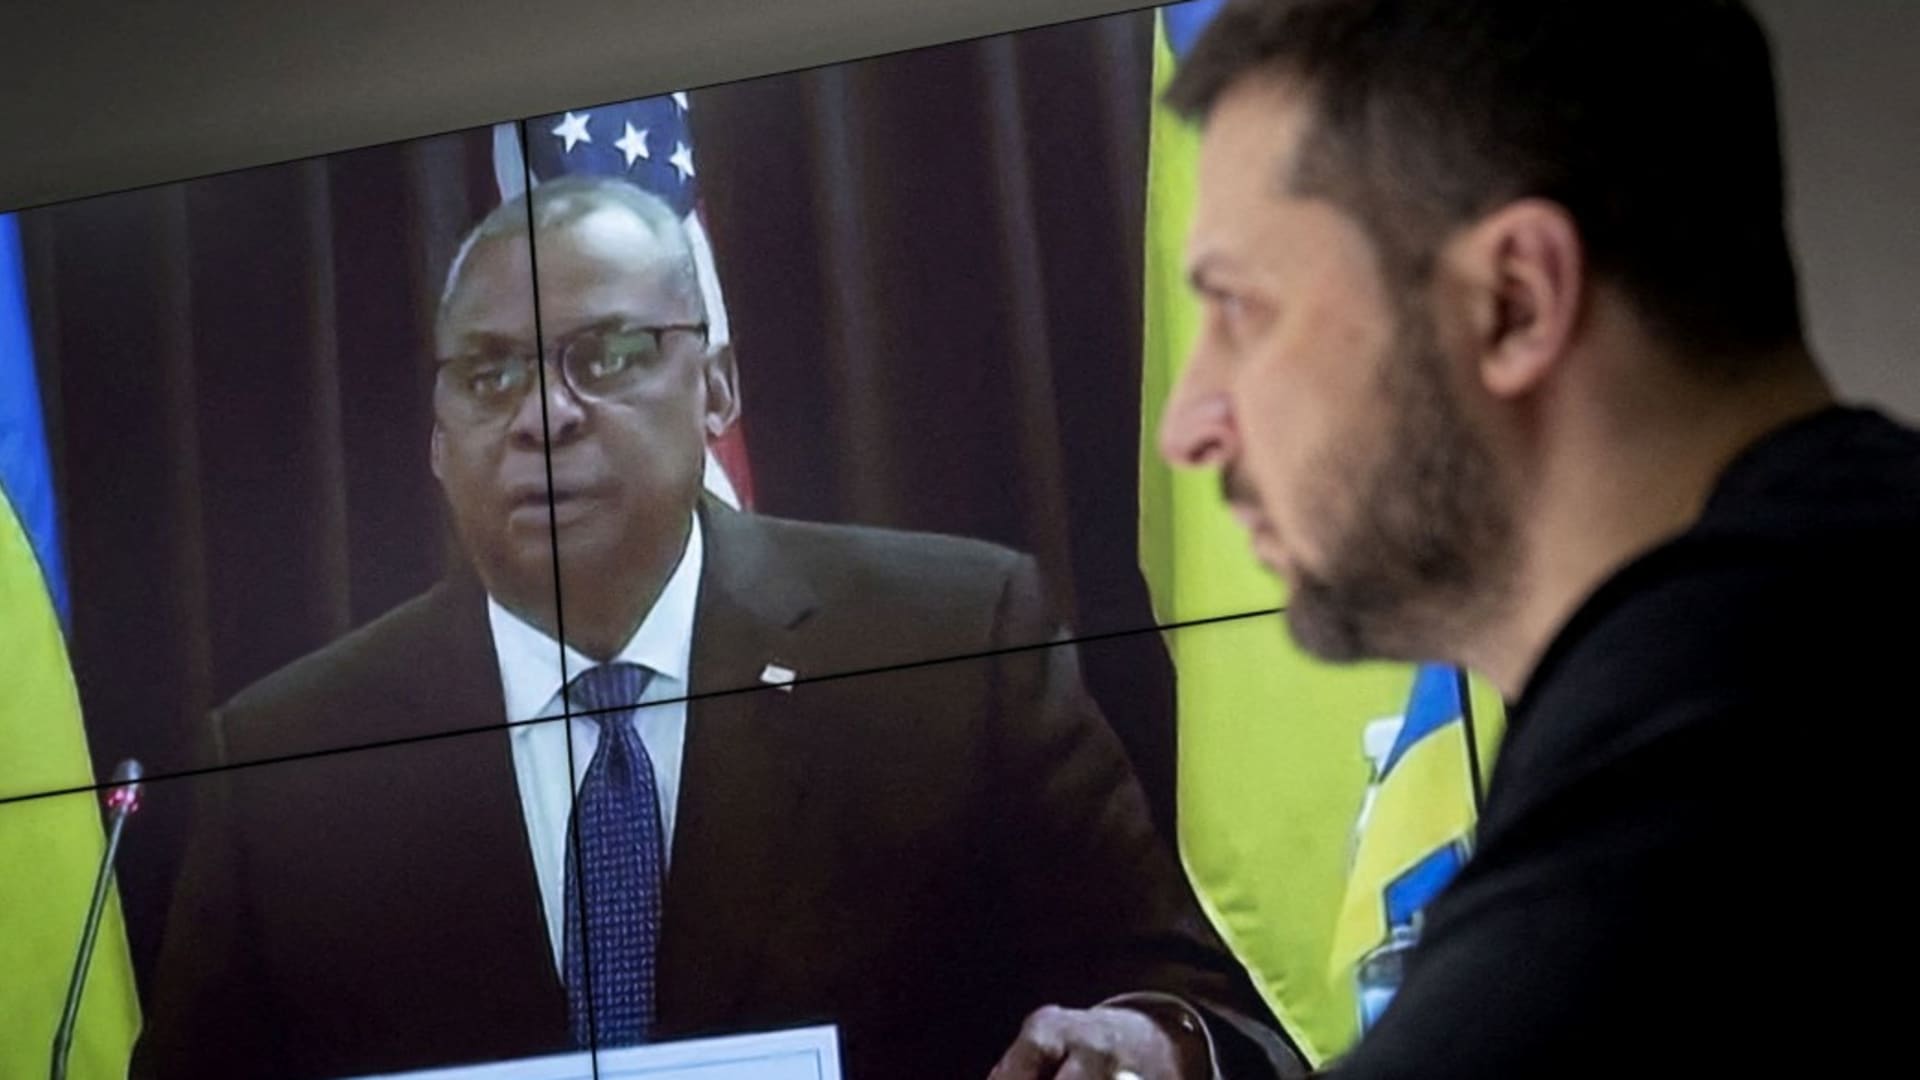 Ukraine's President Volodymyr Zelenskyy speaks via video link with U.S. Secretary of Defense Lloyd Austin (on screen) during a meeting of ministers of defense at Ramstein Air Base in Germany to discuss how to help Ukraine defend itself, amid Russia's attack on Ukraine continues, in Kyiv, Ukraine January 20, 2023. 